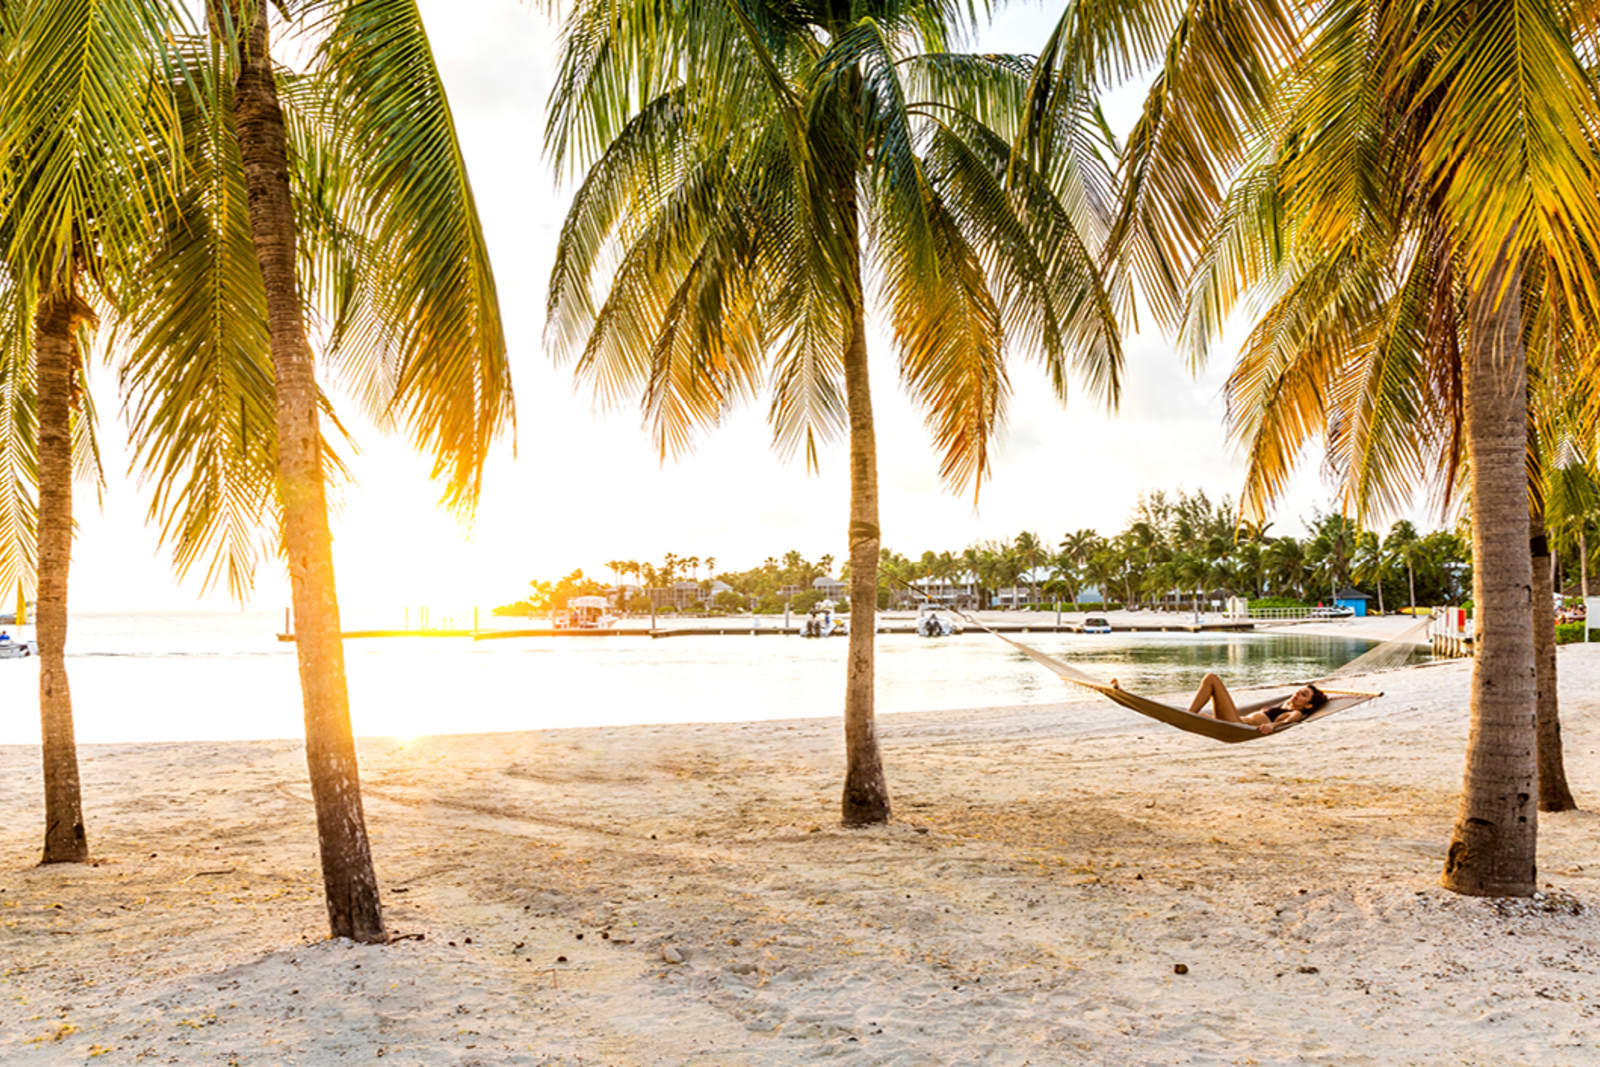 A person laying on a hammock between two palm trees on a Caribbean beach